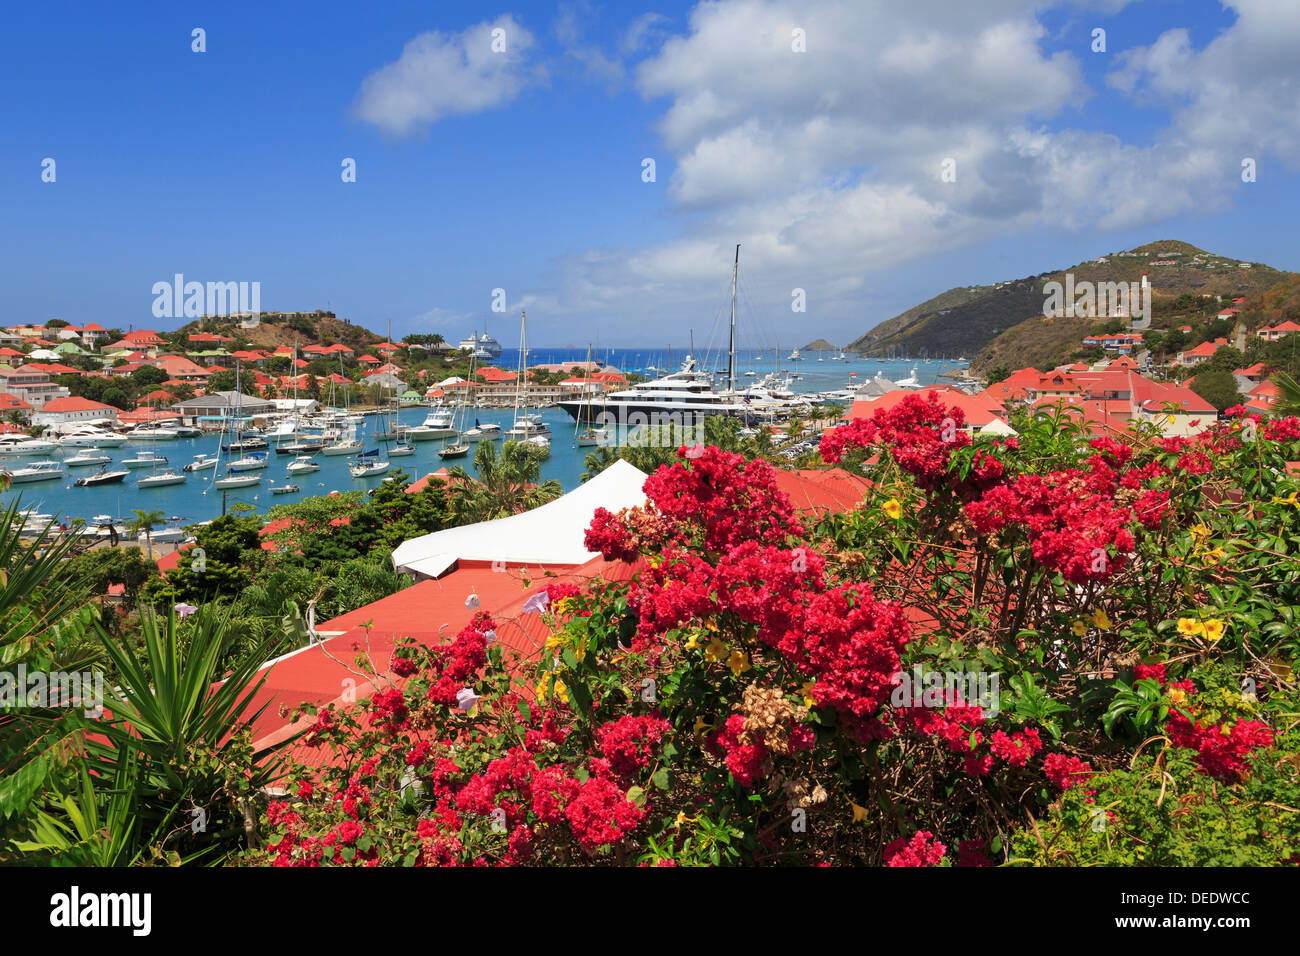 High Quality Stock Videos of gustavia